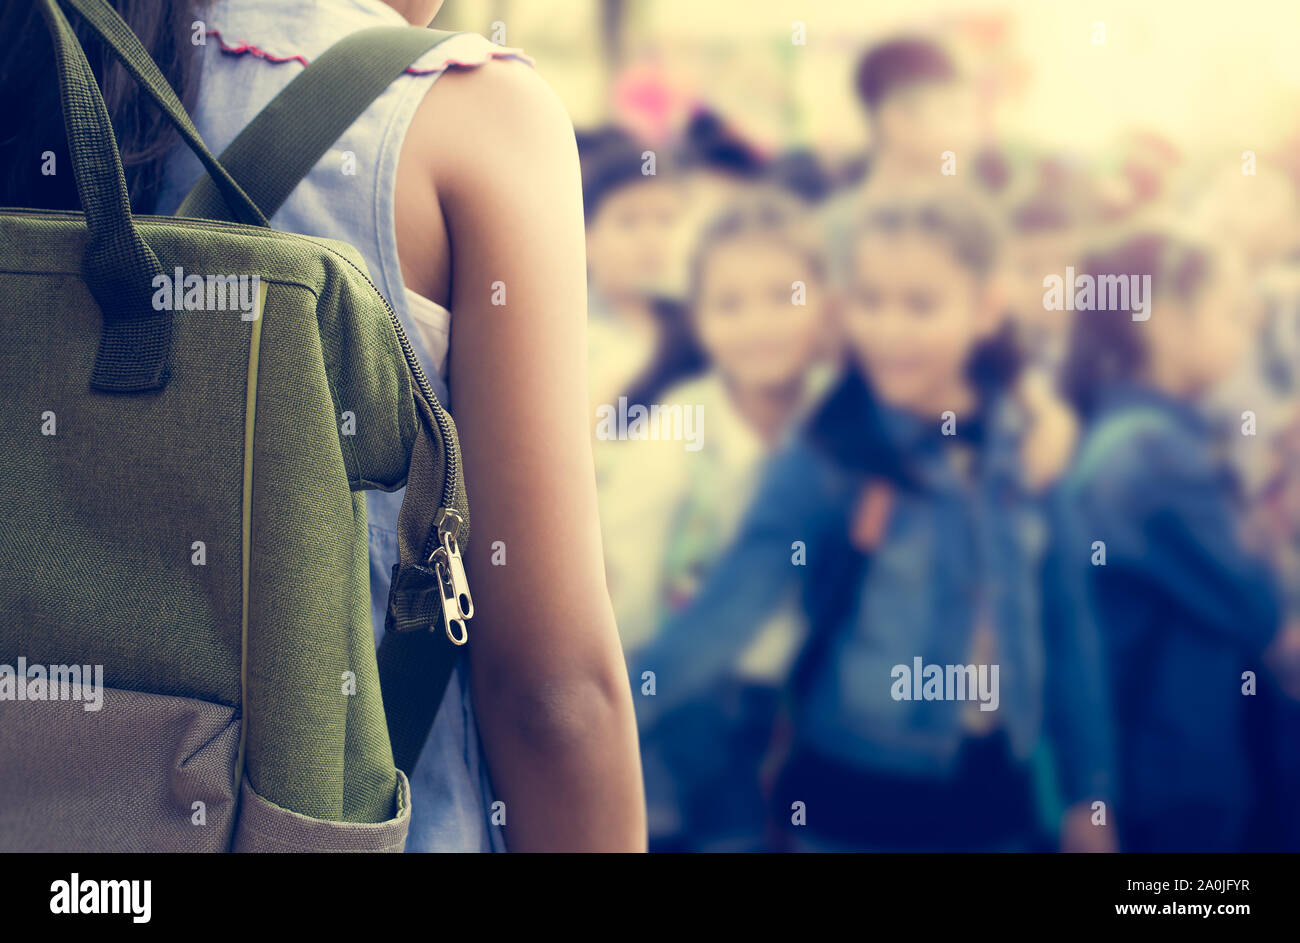 Girl with backpack attend school activities, Education concept. Stock Photo